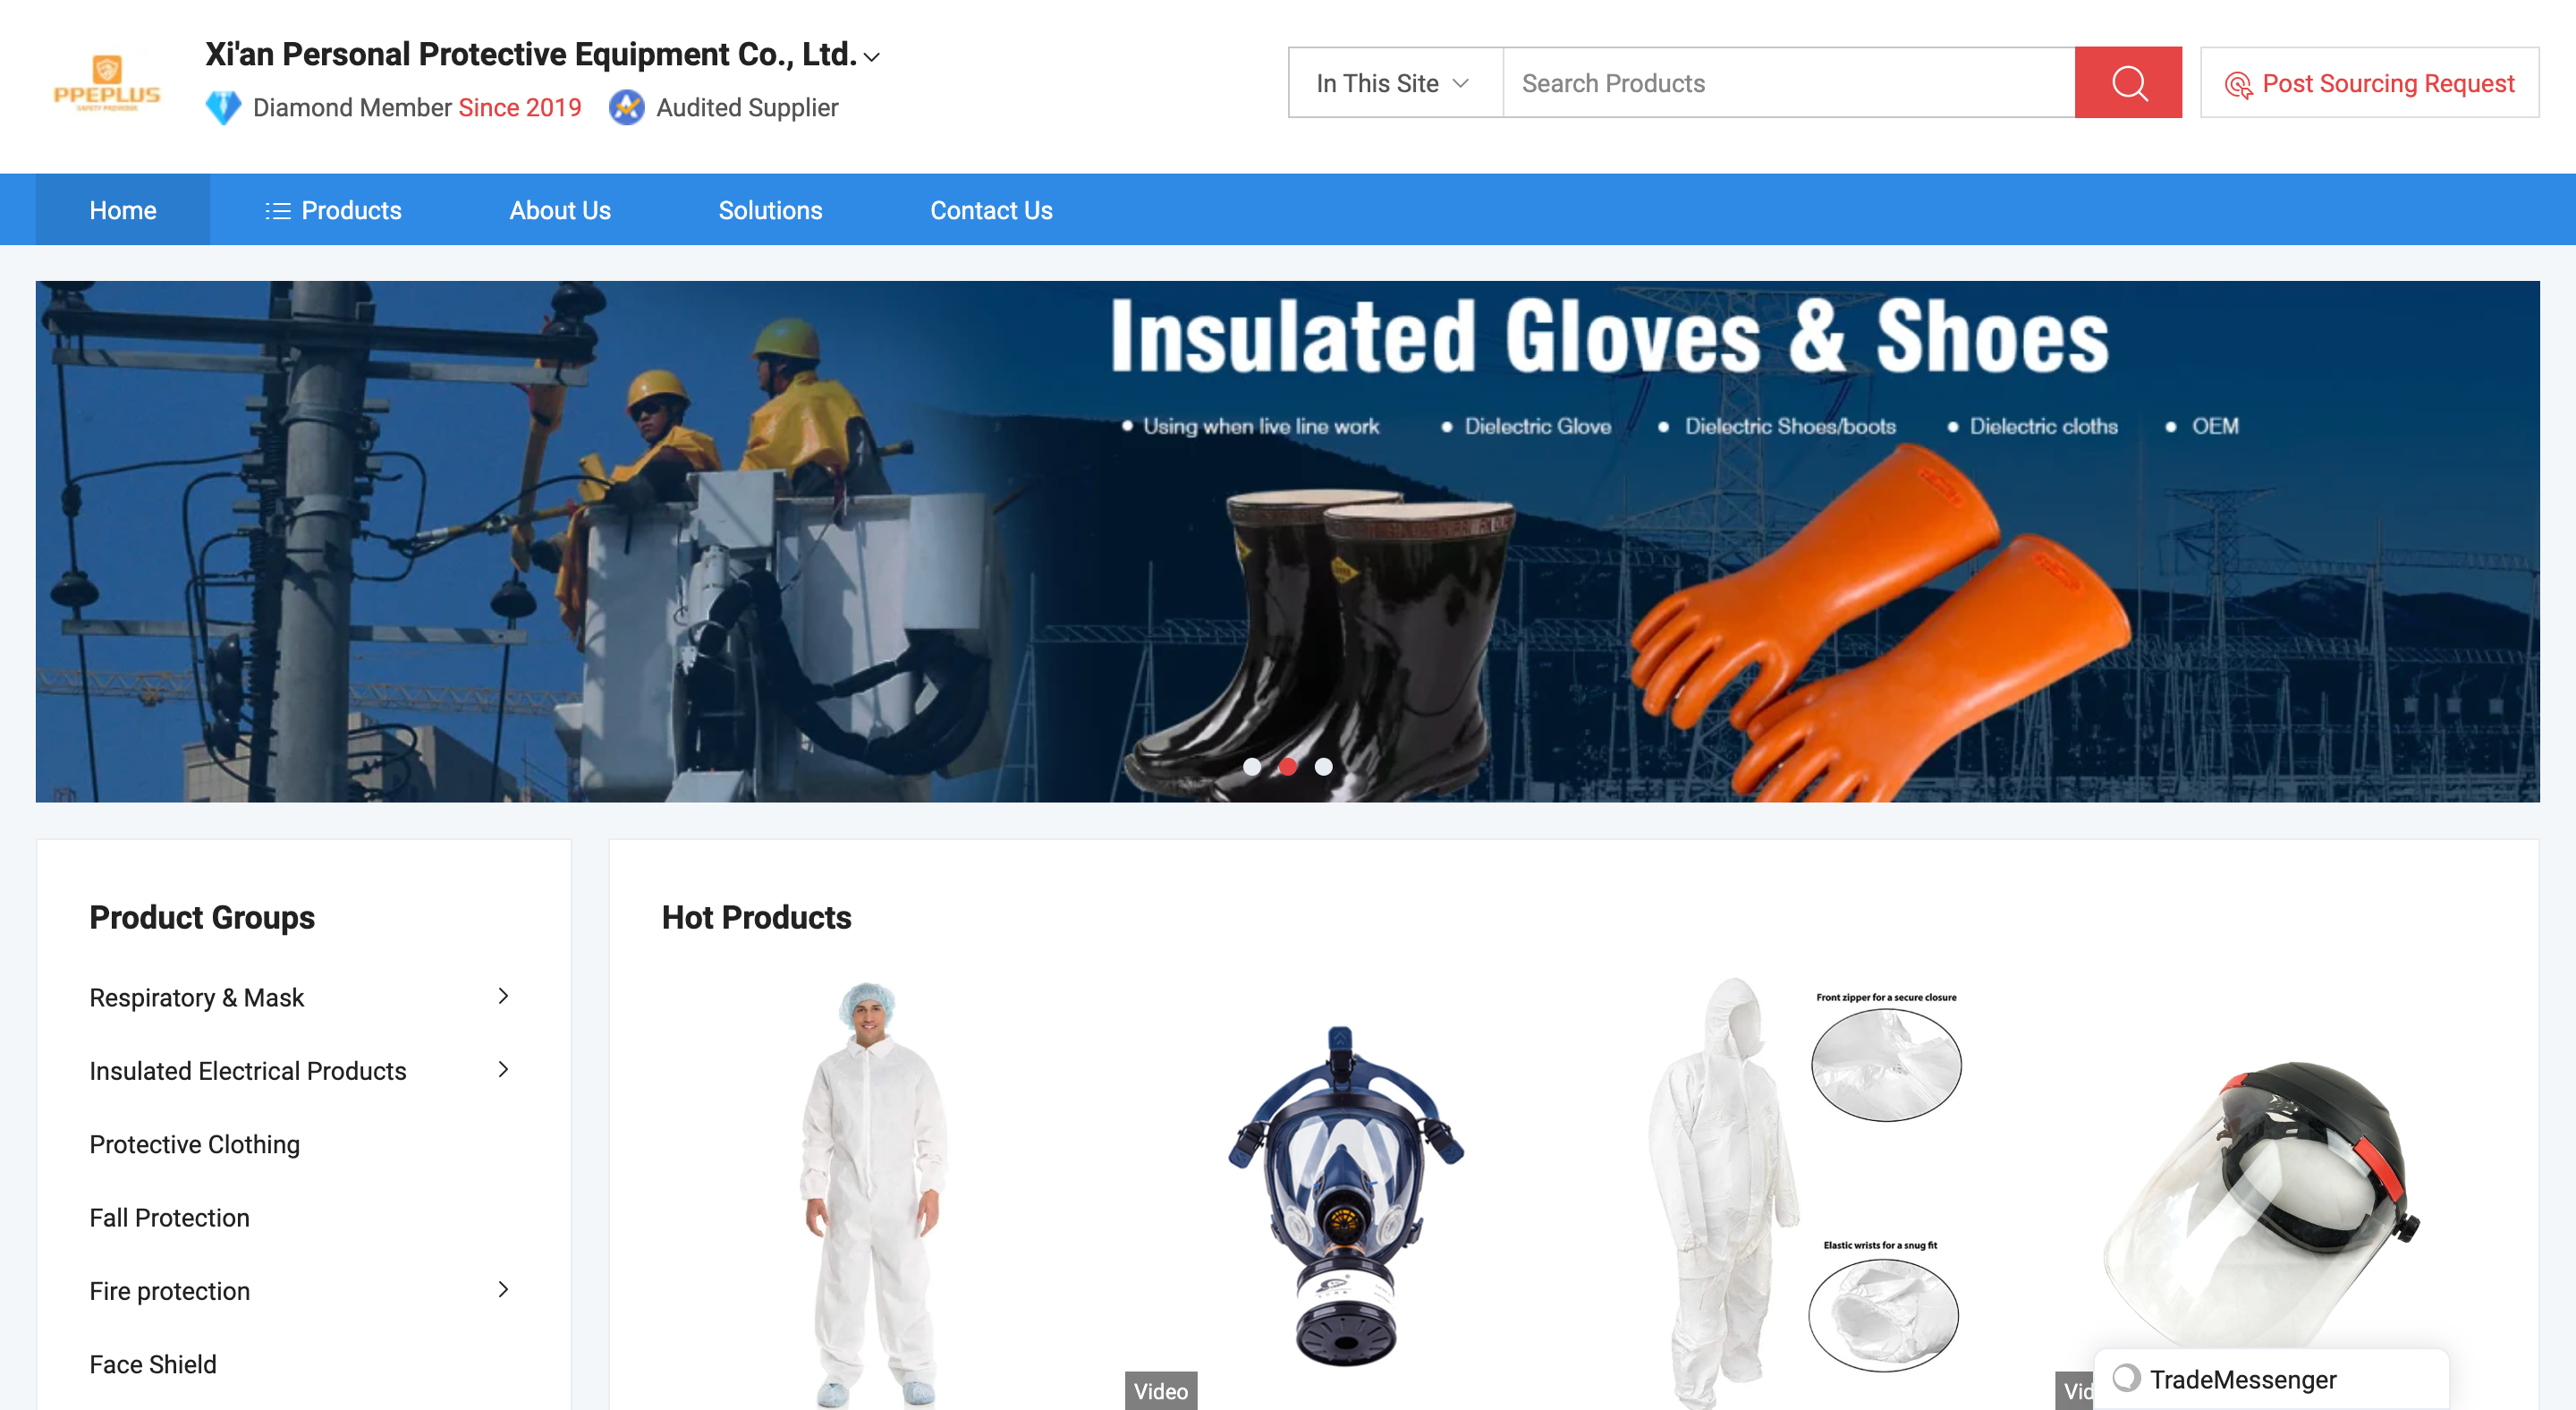 Xi′an Personal Protective Equipment Co., Ltd